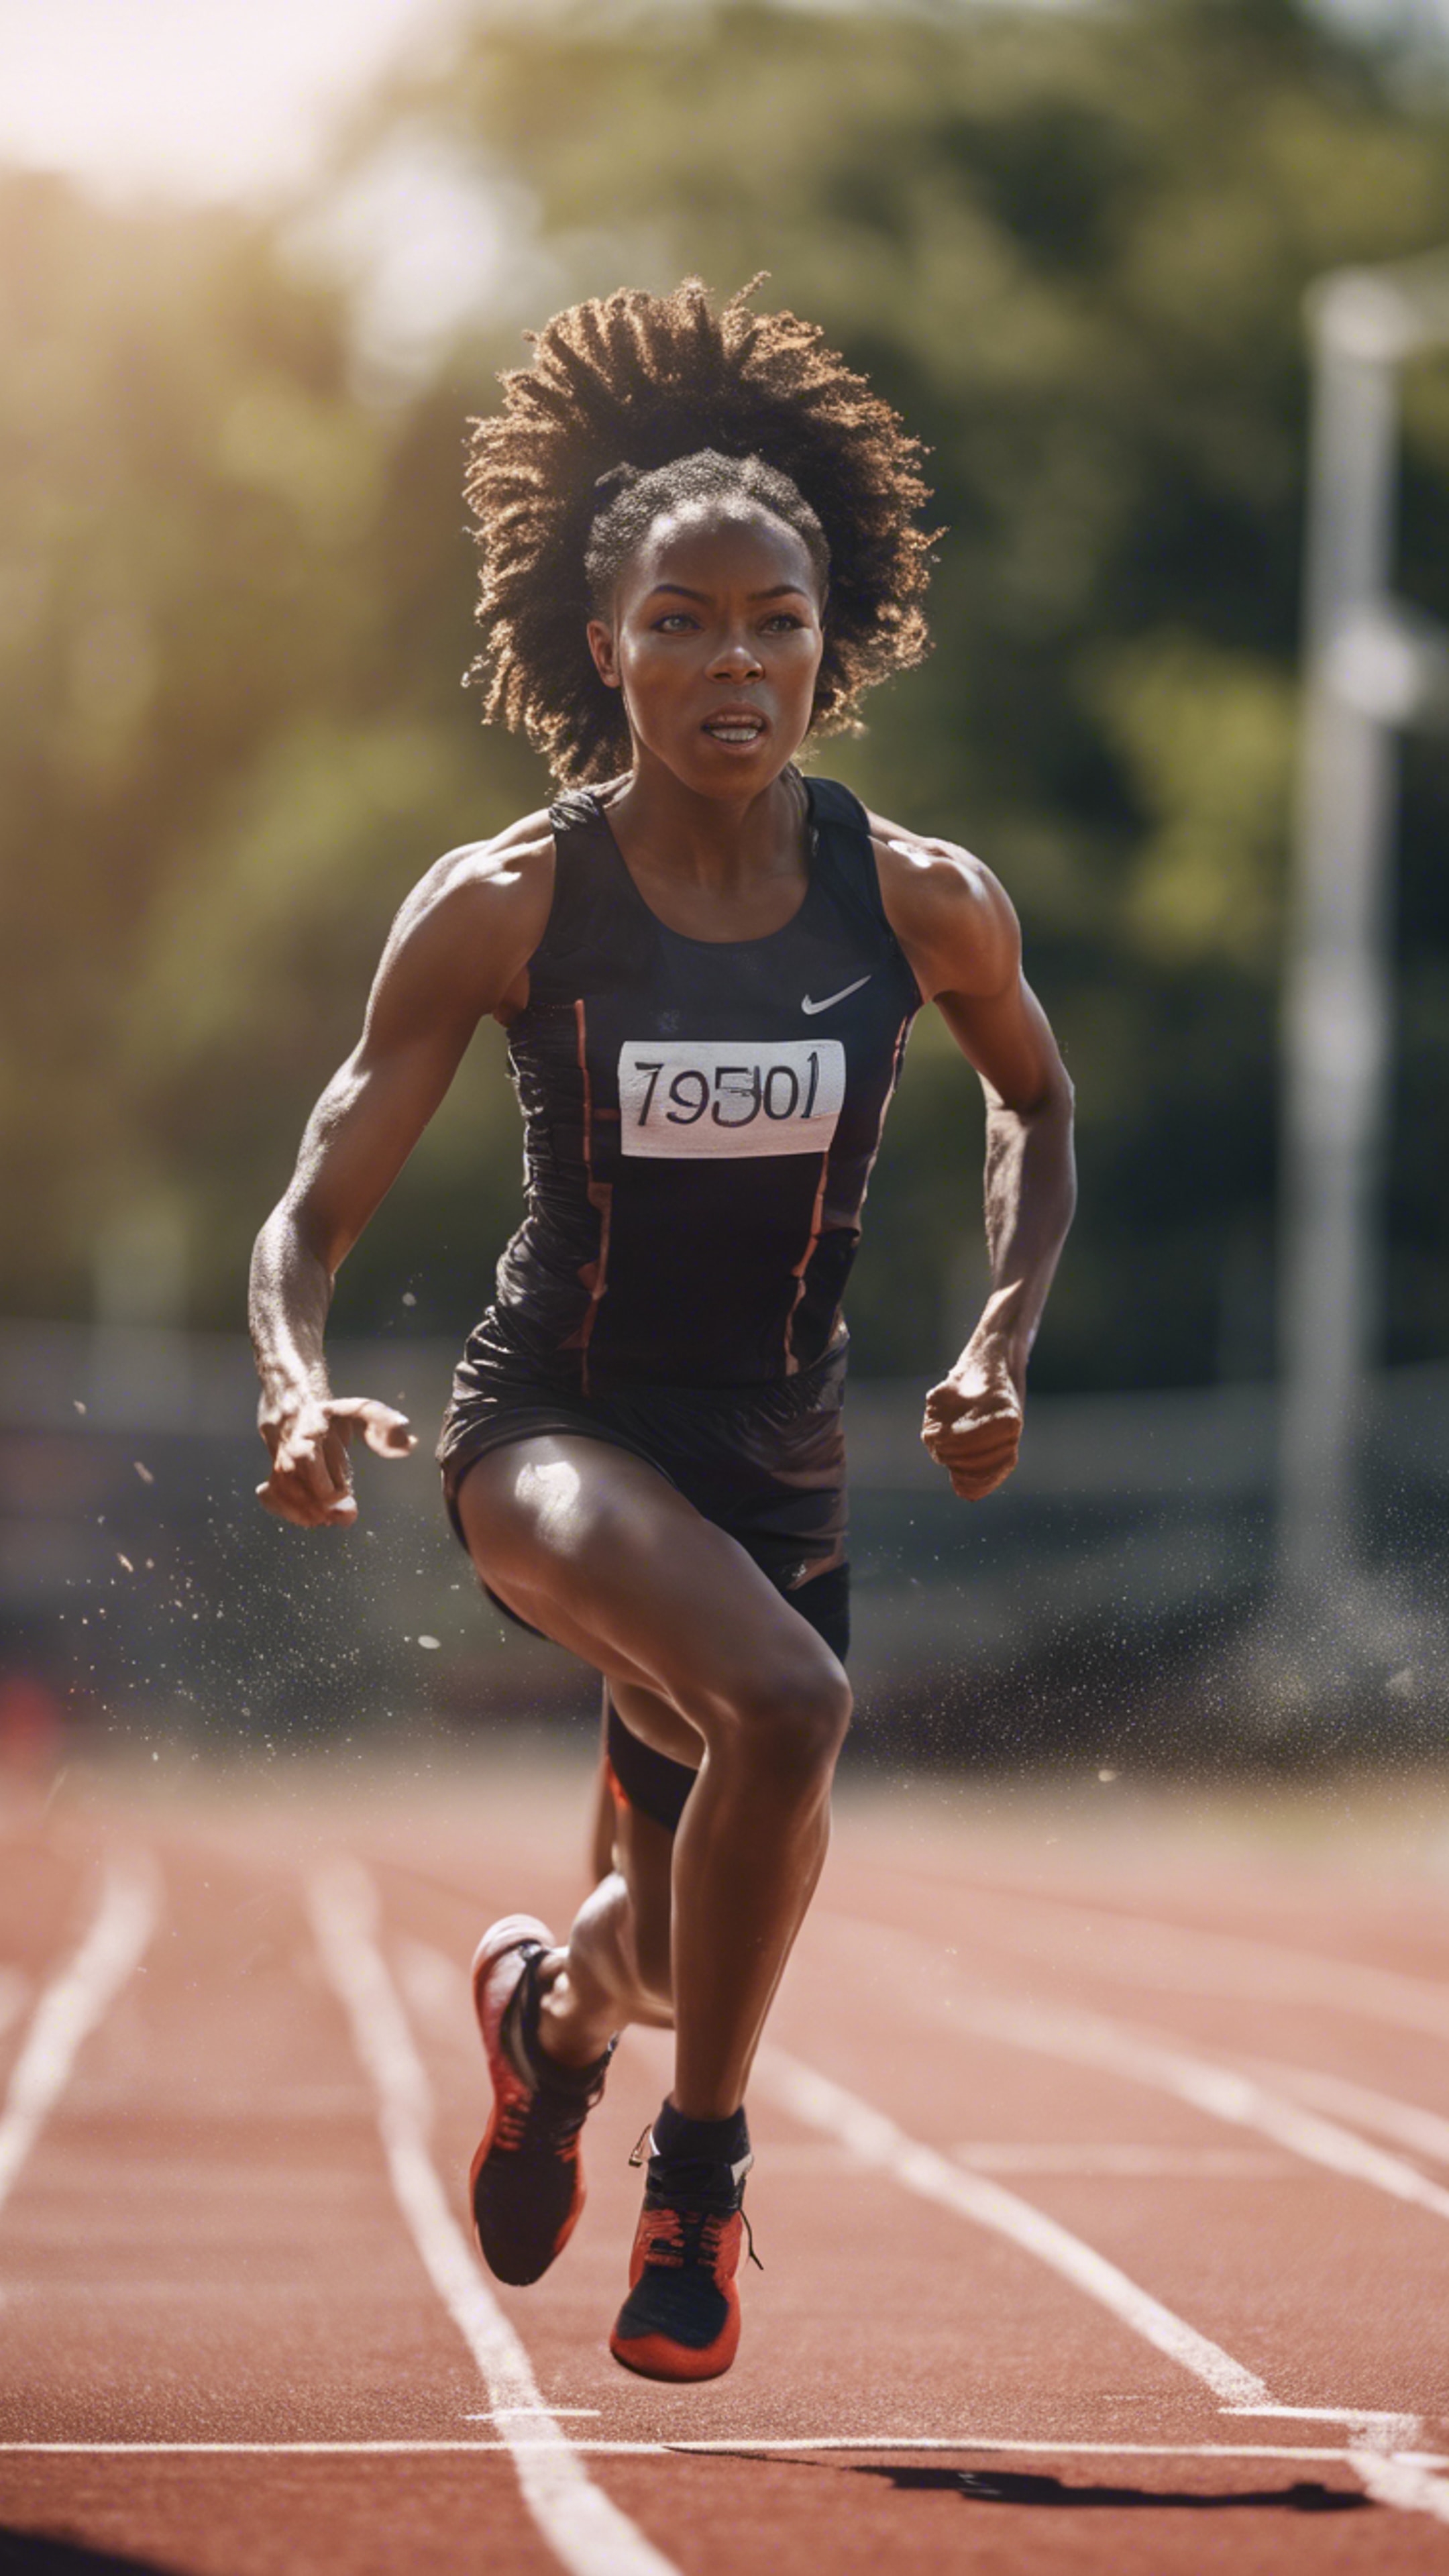 A dynamic image of a black girl engaging in competitive sprint, showing her vital energy. Tapet[76eb5b44f4a84b498fc2]